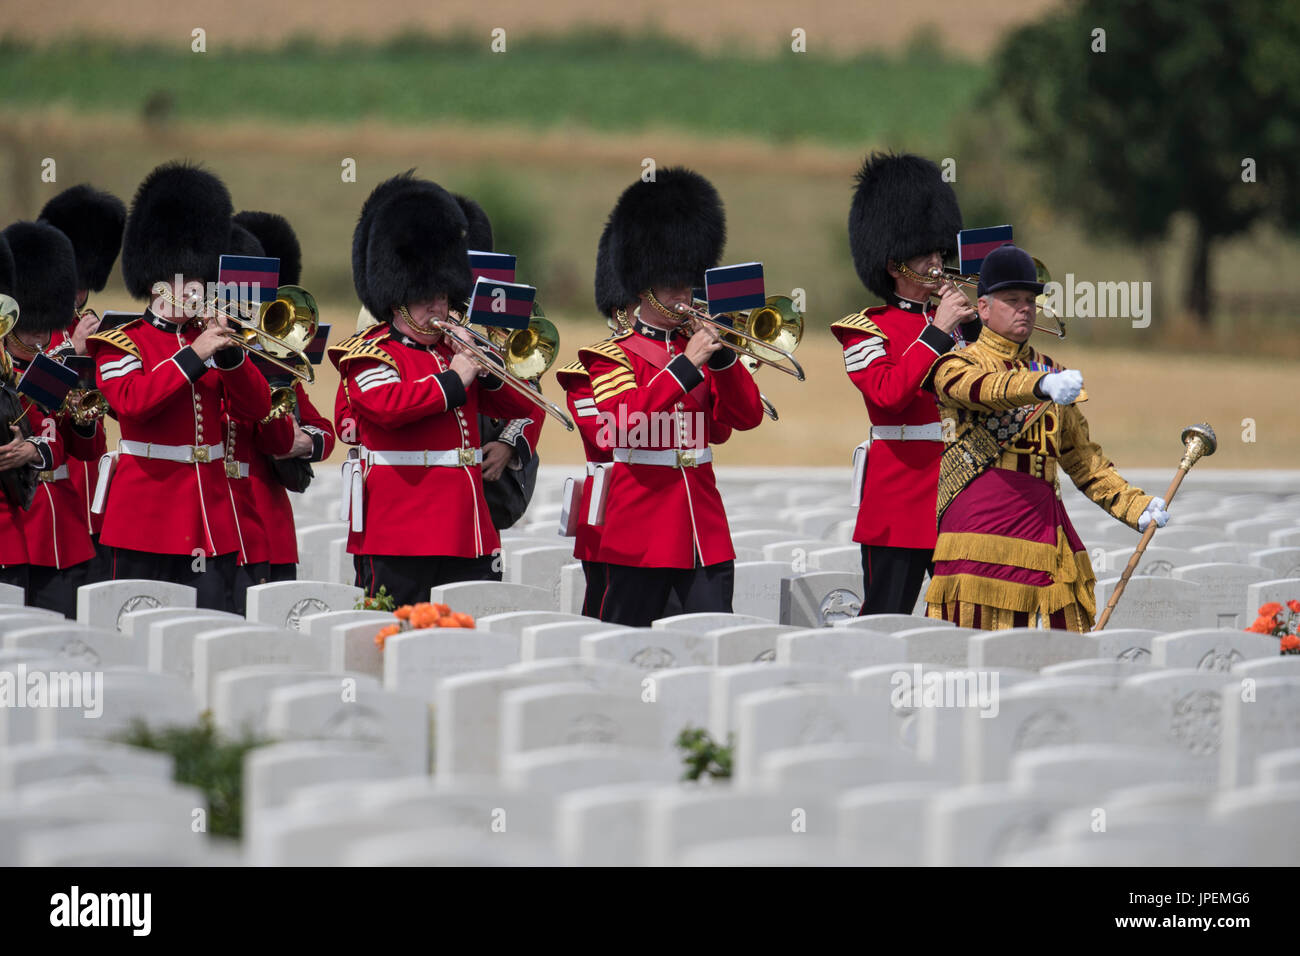 British Troops take part in the commemoration events for the World War One Battle of Passchendaele at the Tyne Cot Cemetery near Ypres in Belgium. The military band of the Irish Guards. Stock Photo